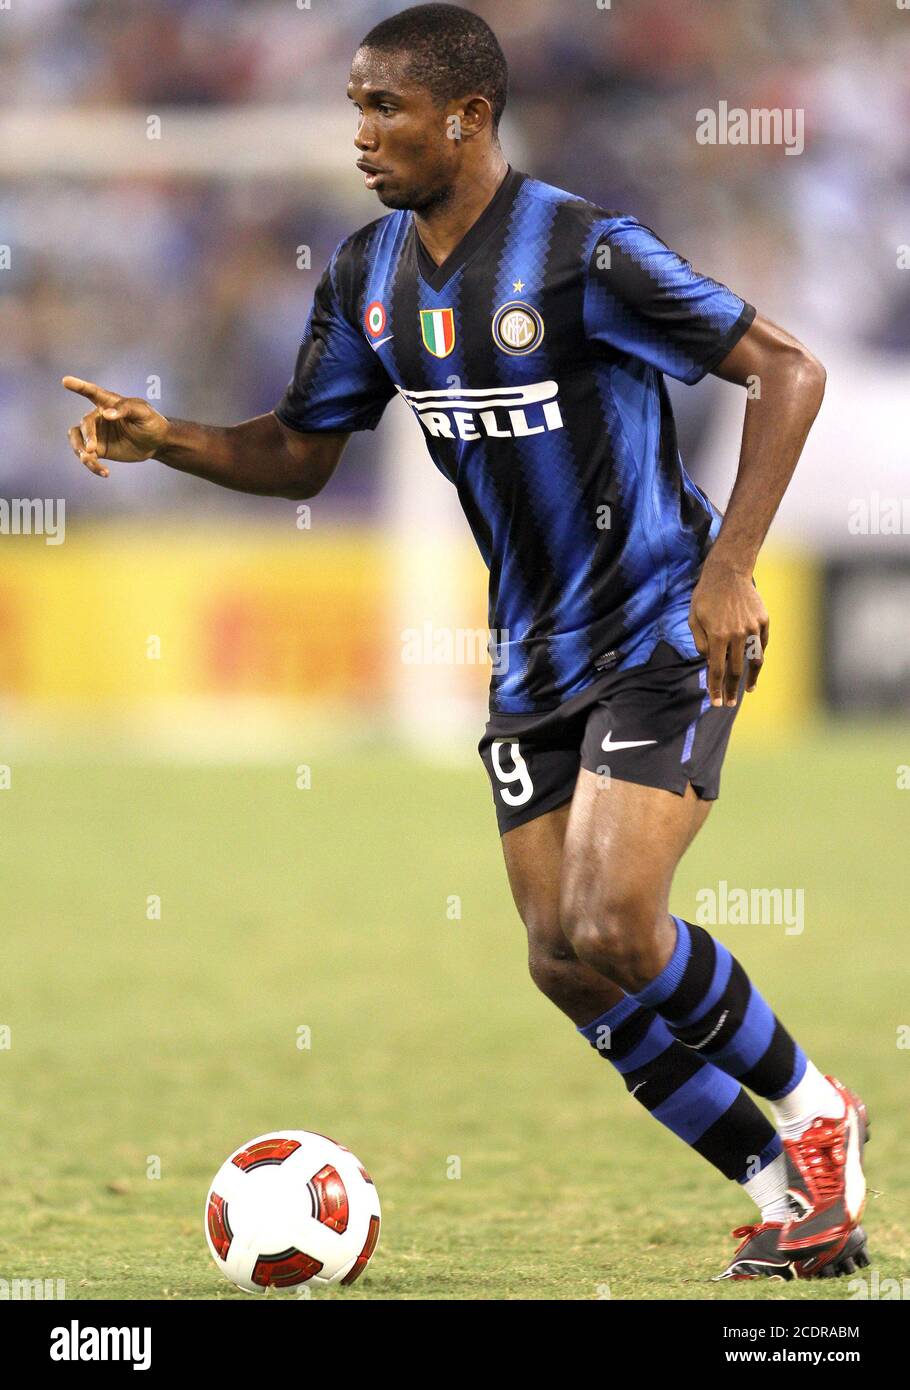 Samuel Eto'o #9 of Inter Milan during an international friendly match against Manchester City on July 31 2010 at M&T Bank Stadium in Baltimore, Maryla Stock Photo